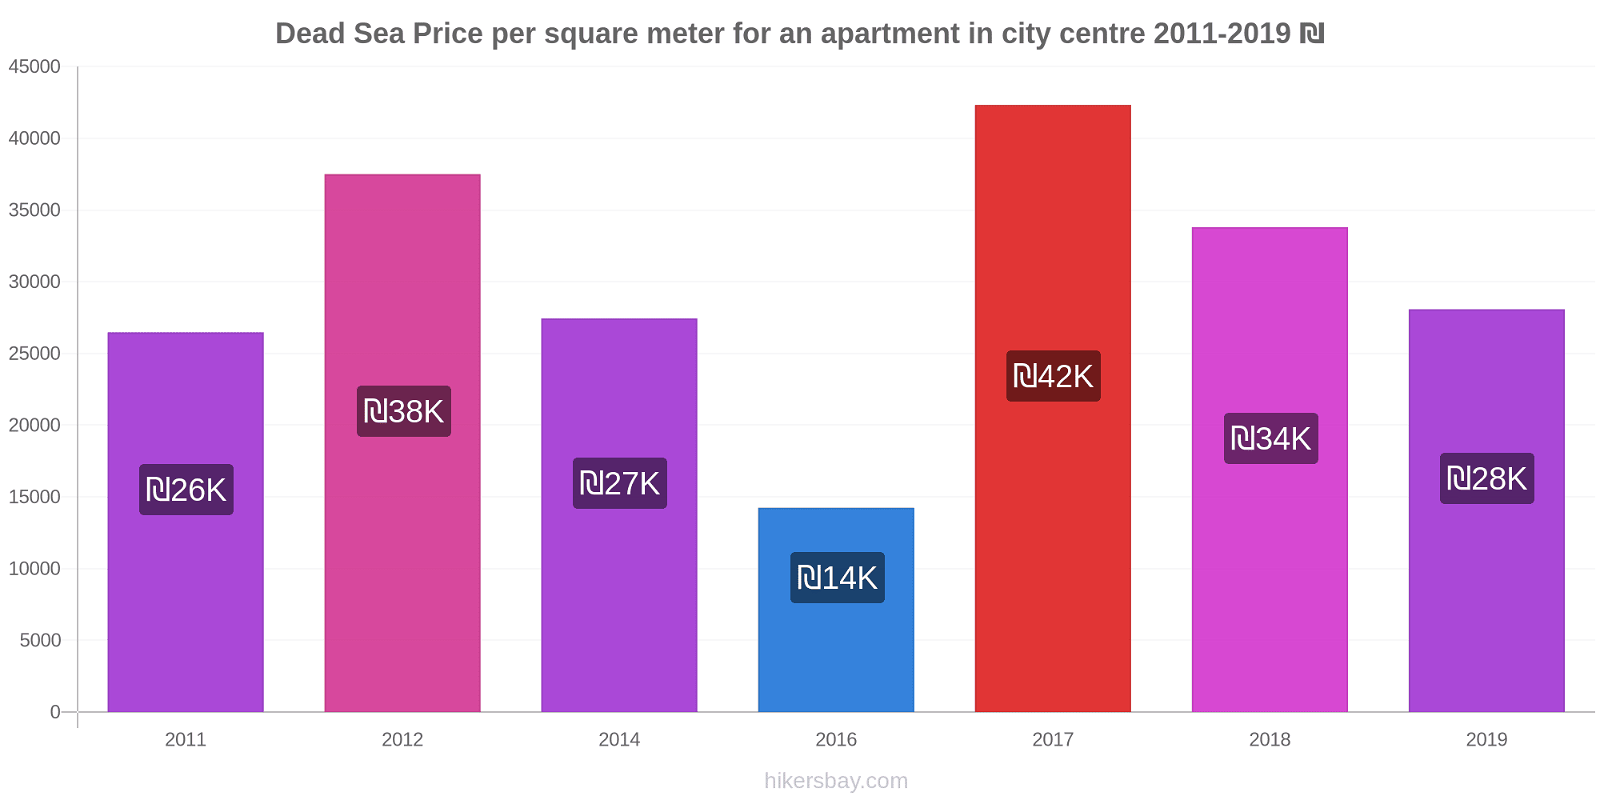 Dead Sea price changes Price per square meter for an apartment in city centre hikersbay.com